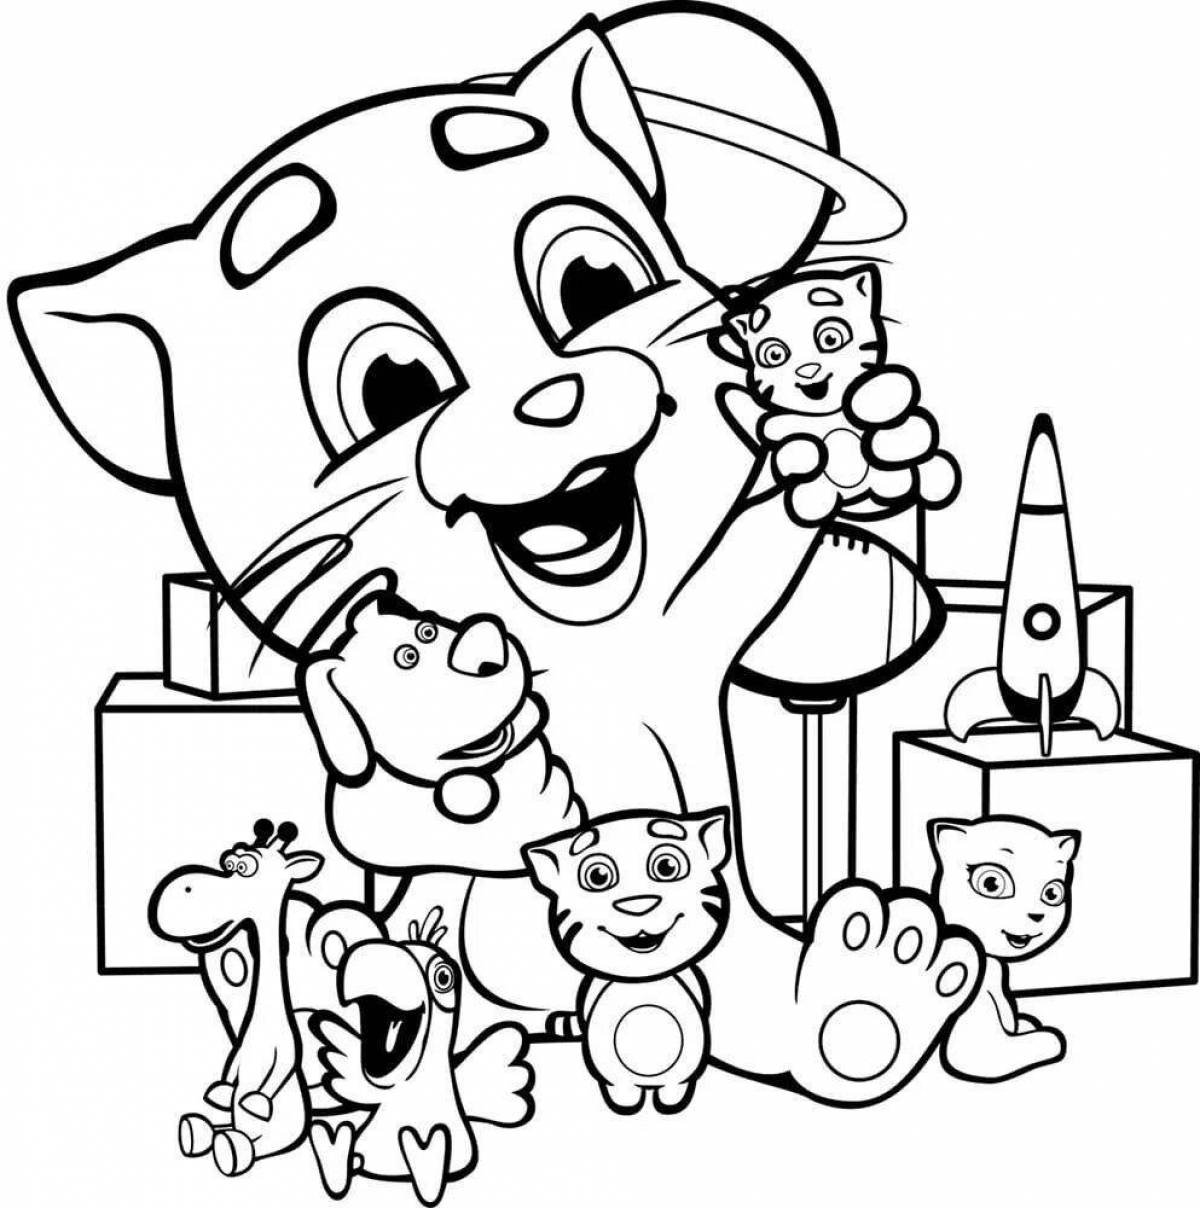 Fabulous tom and angela coloring pages